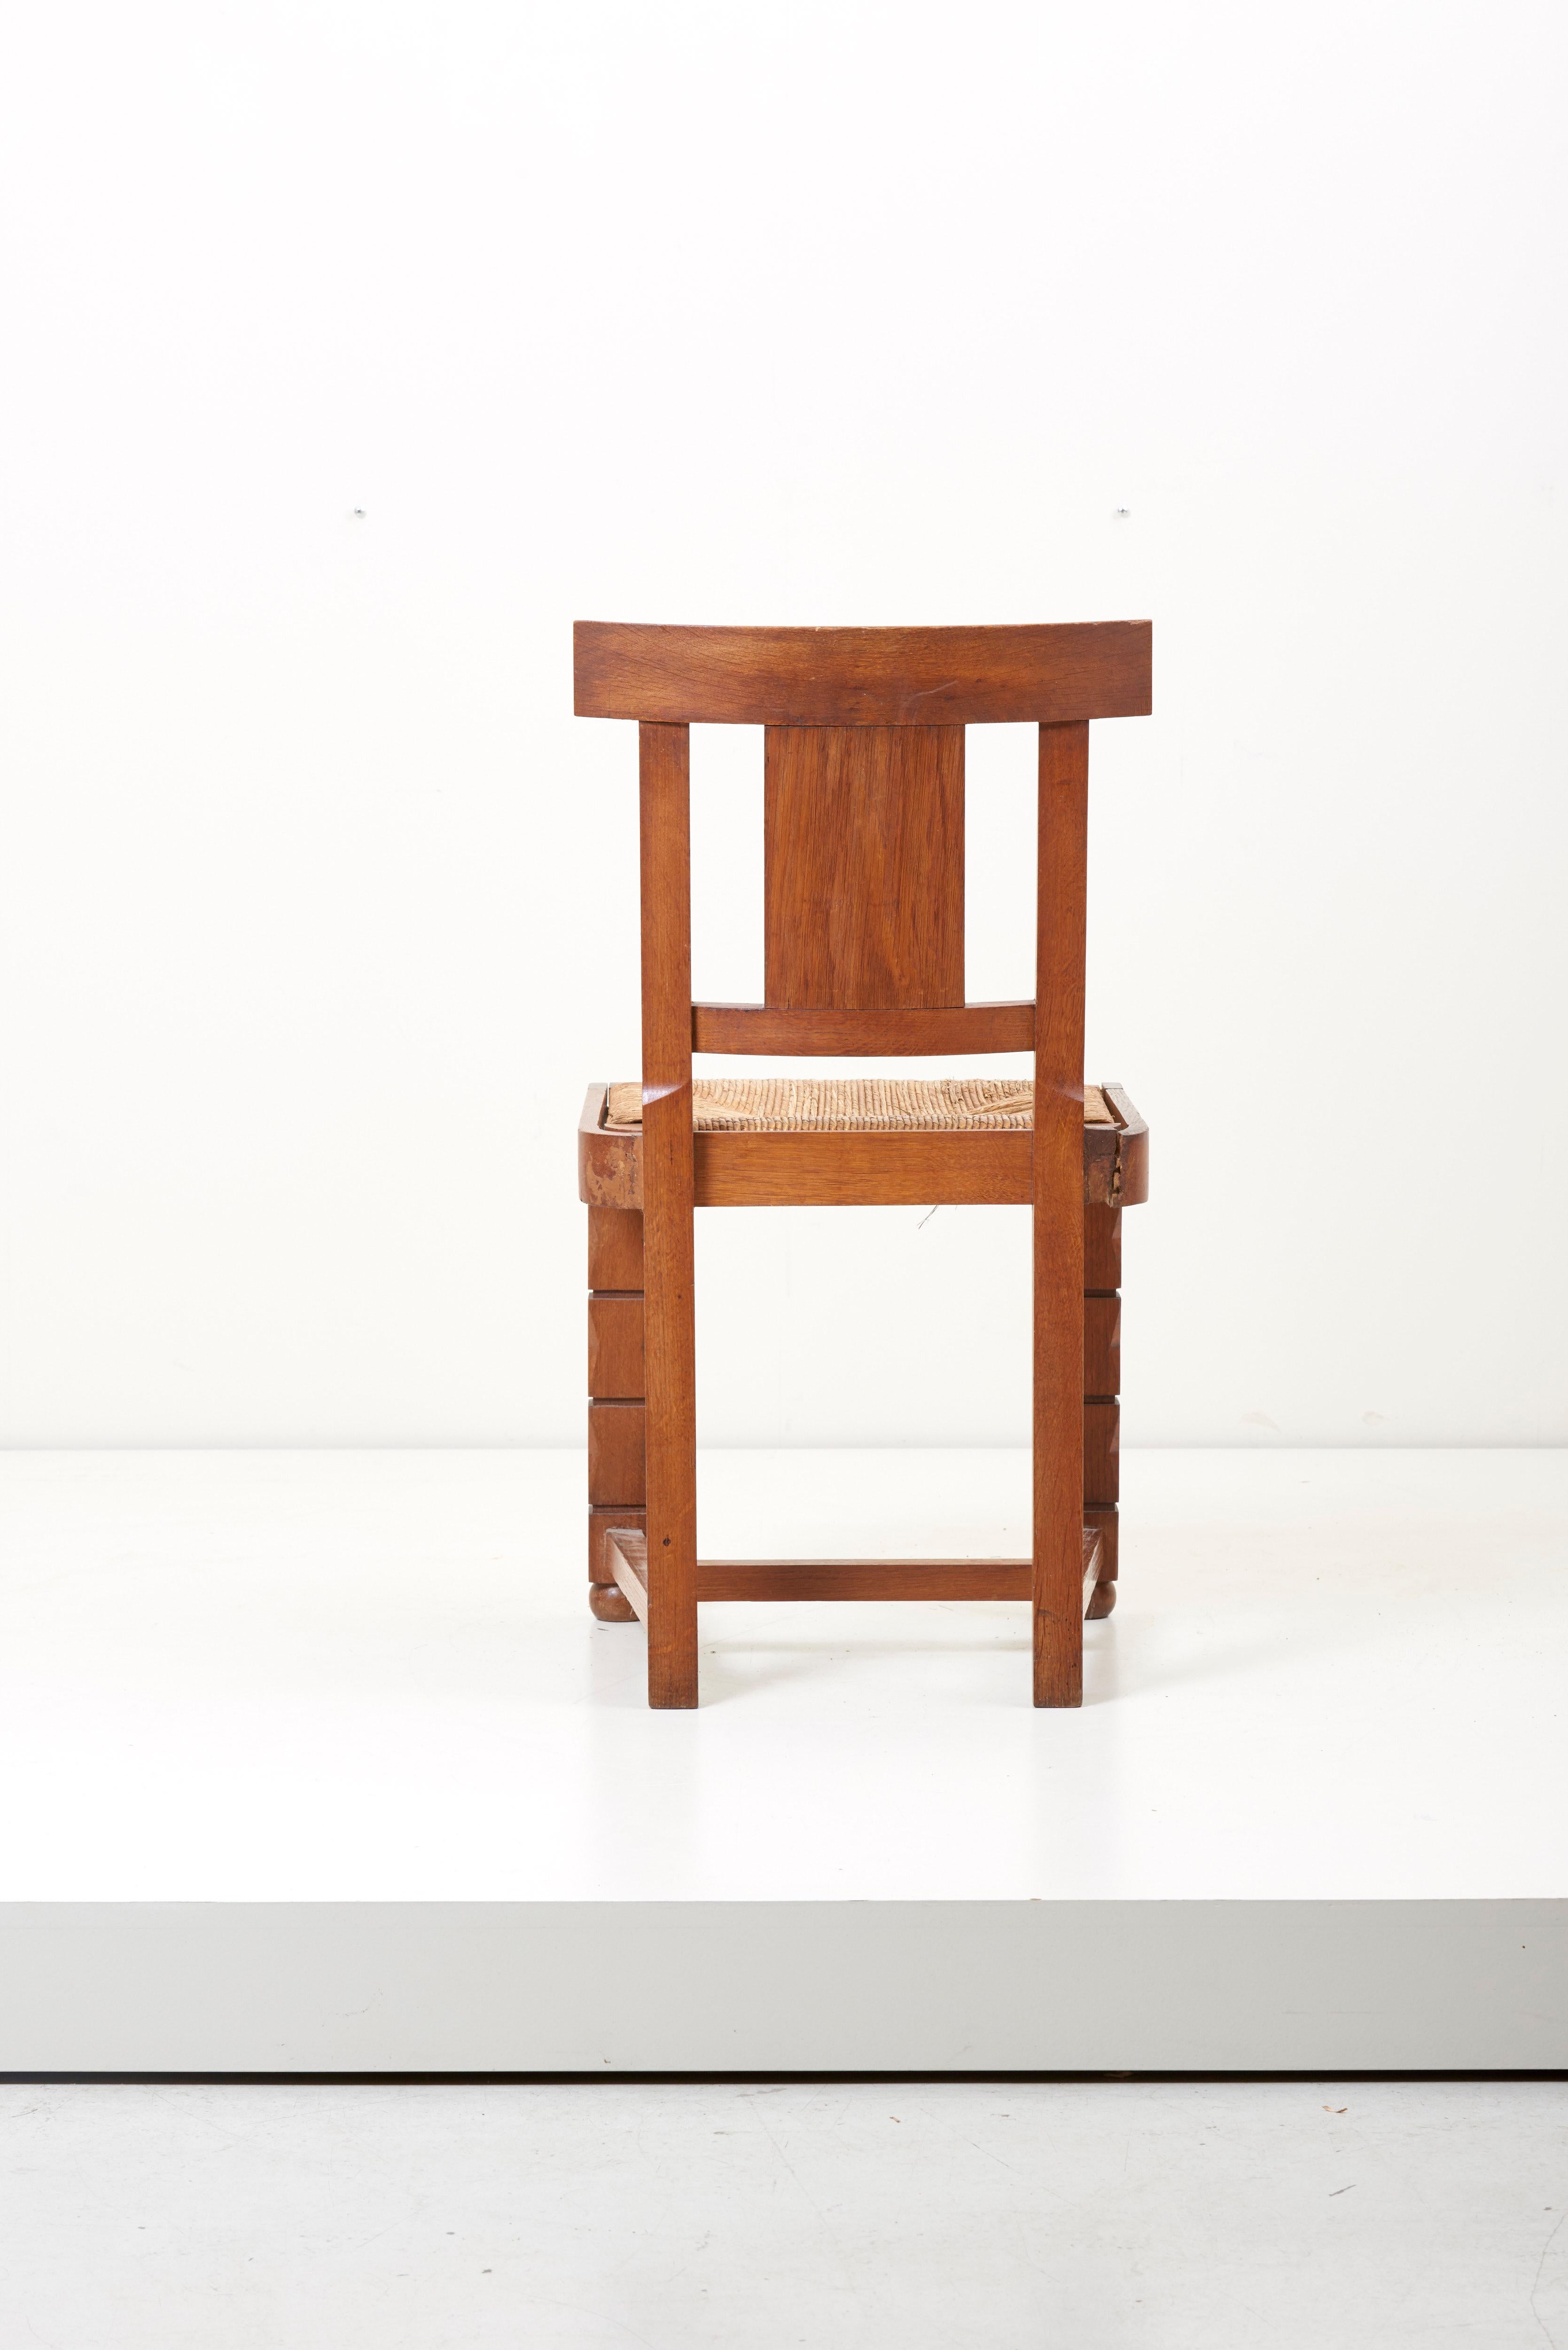 Set of Six Wooden Chairs by Jacques Mottheau, France, 1930s For Sale 1